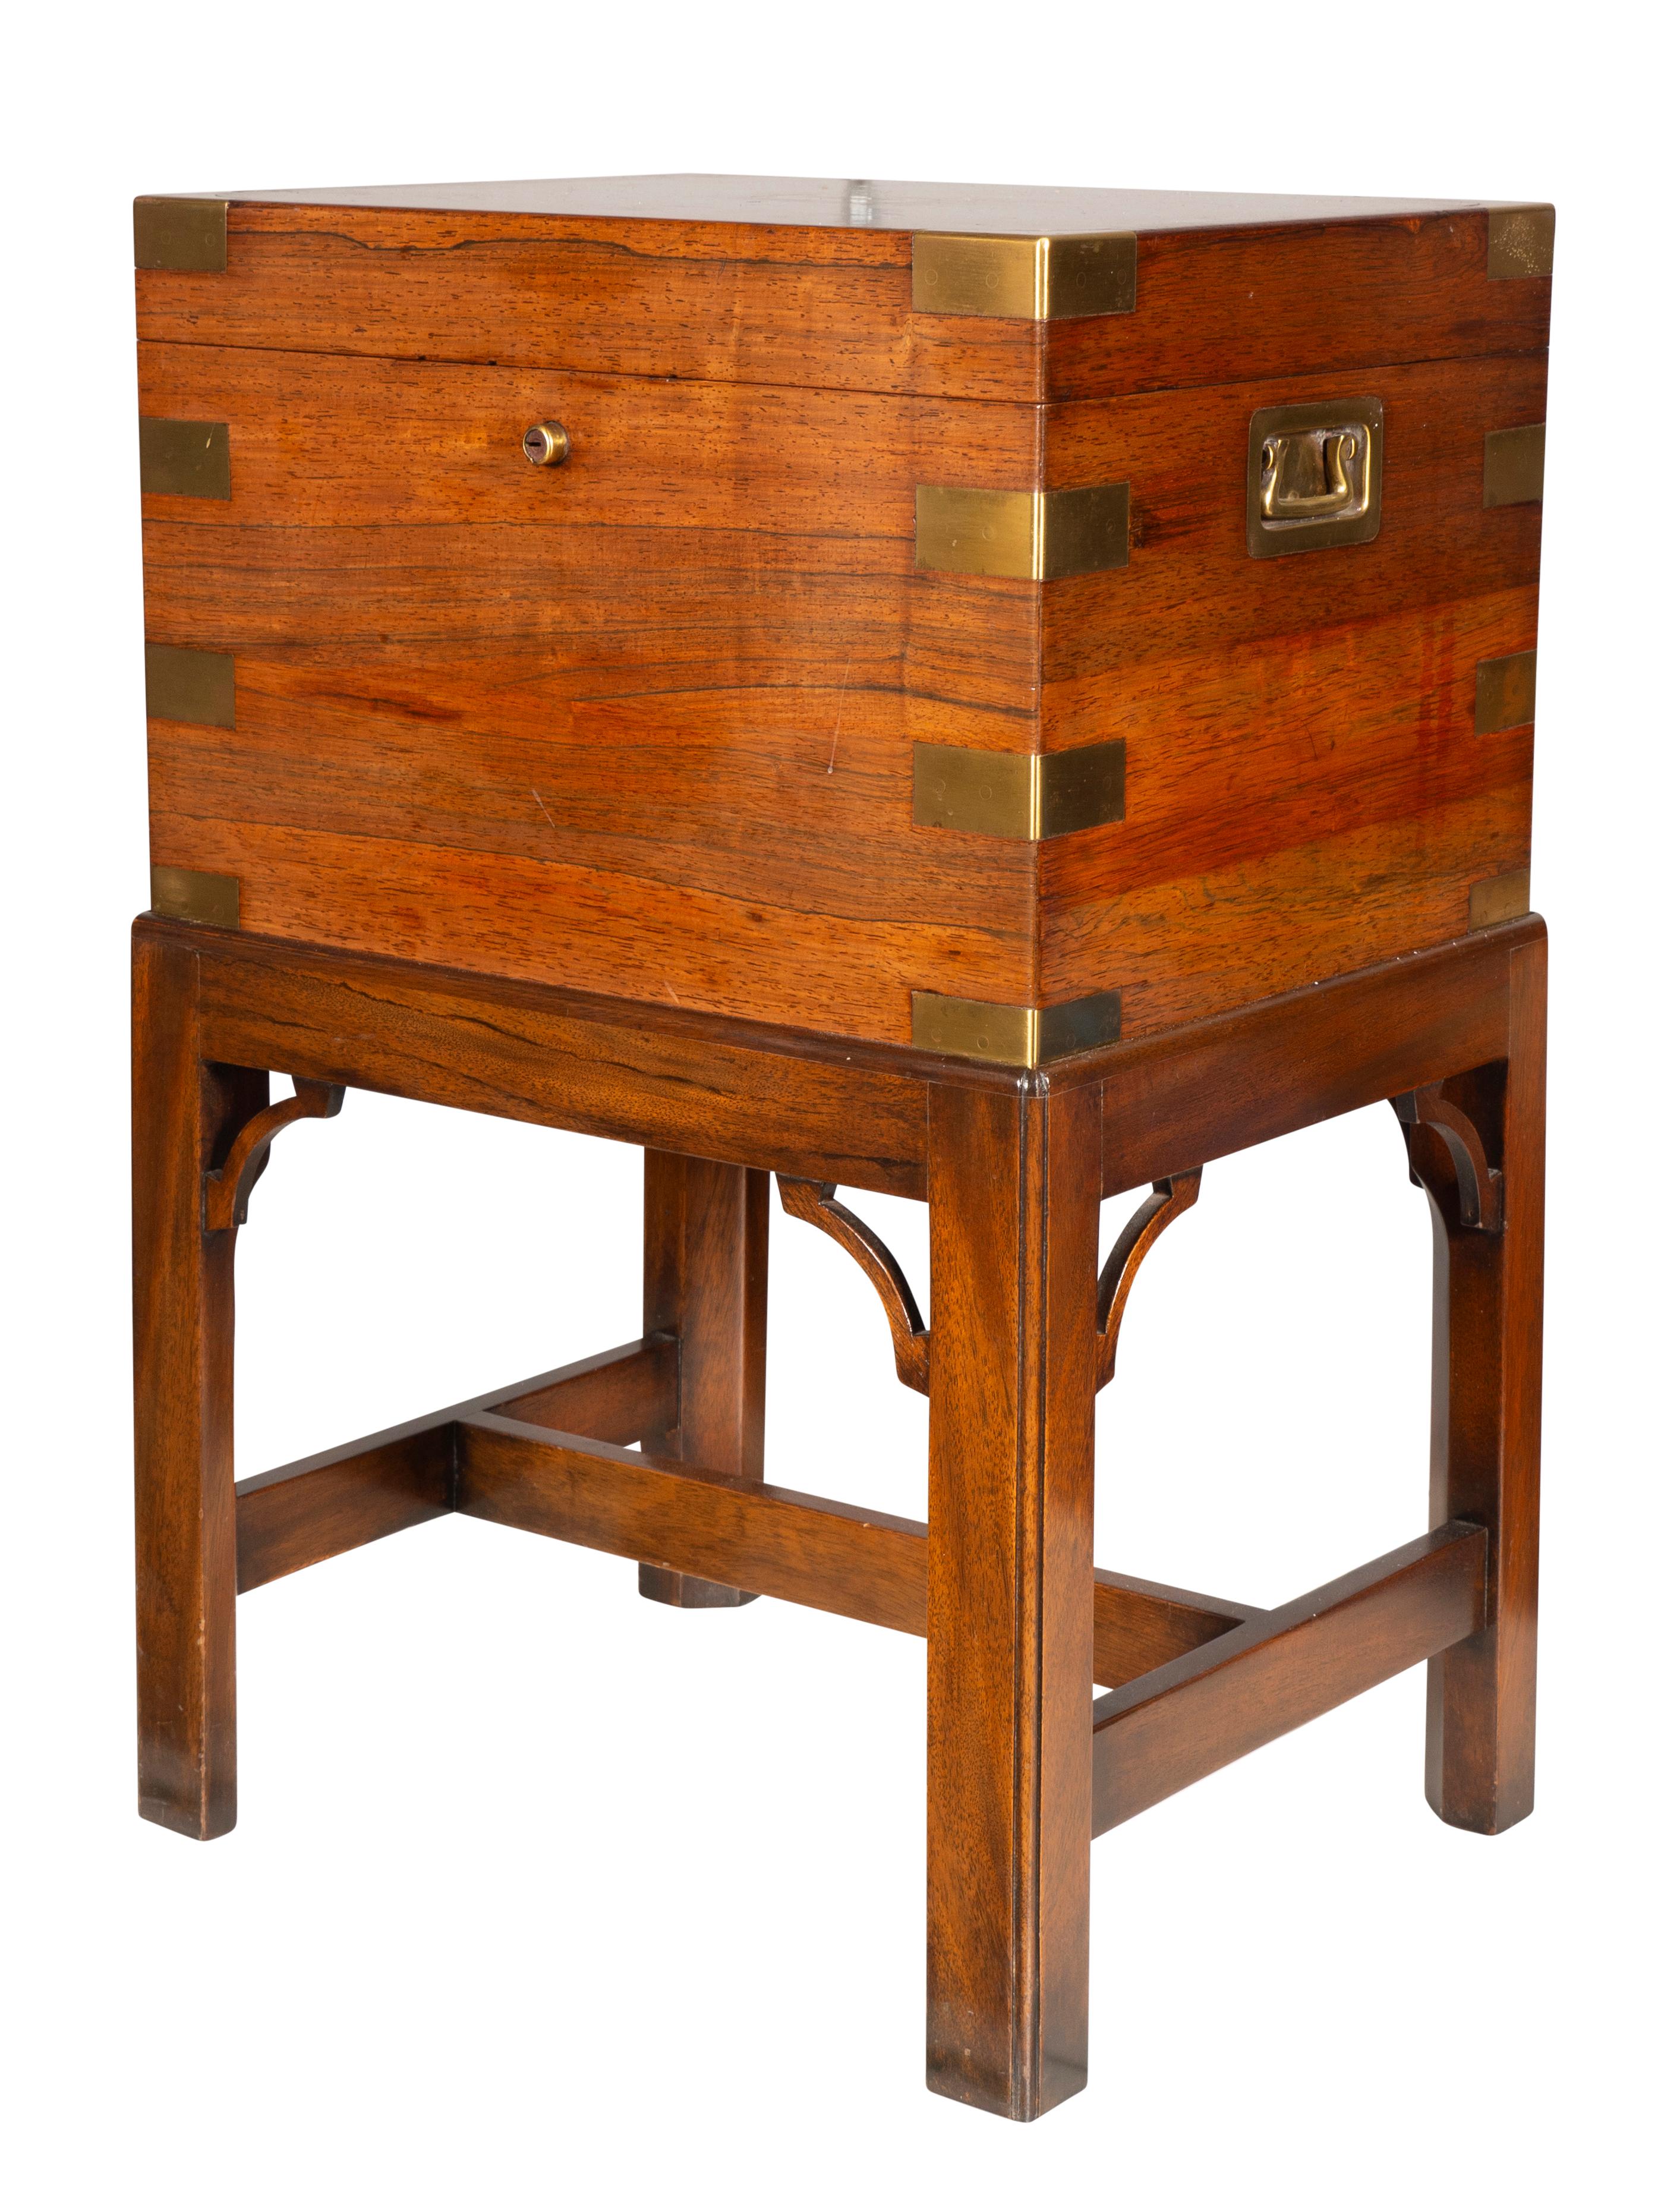 20th Century English Rosewood And Brass Humidor On Stand For Sale